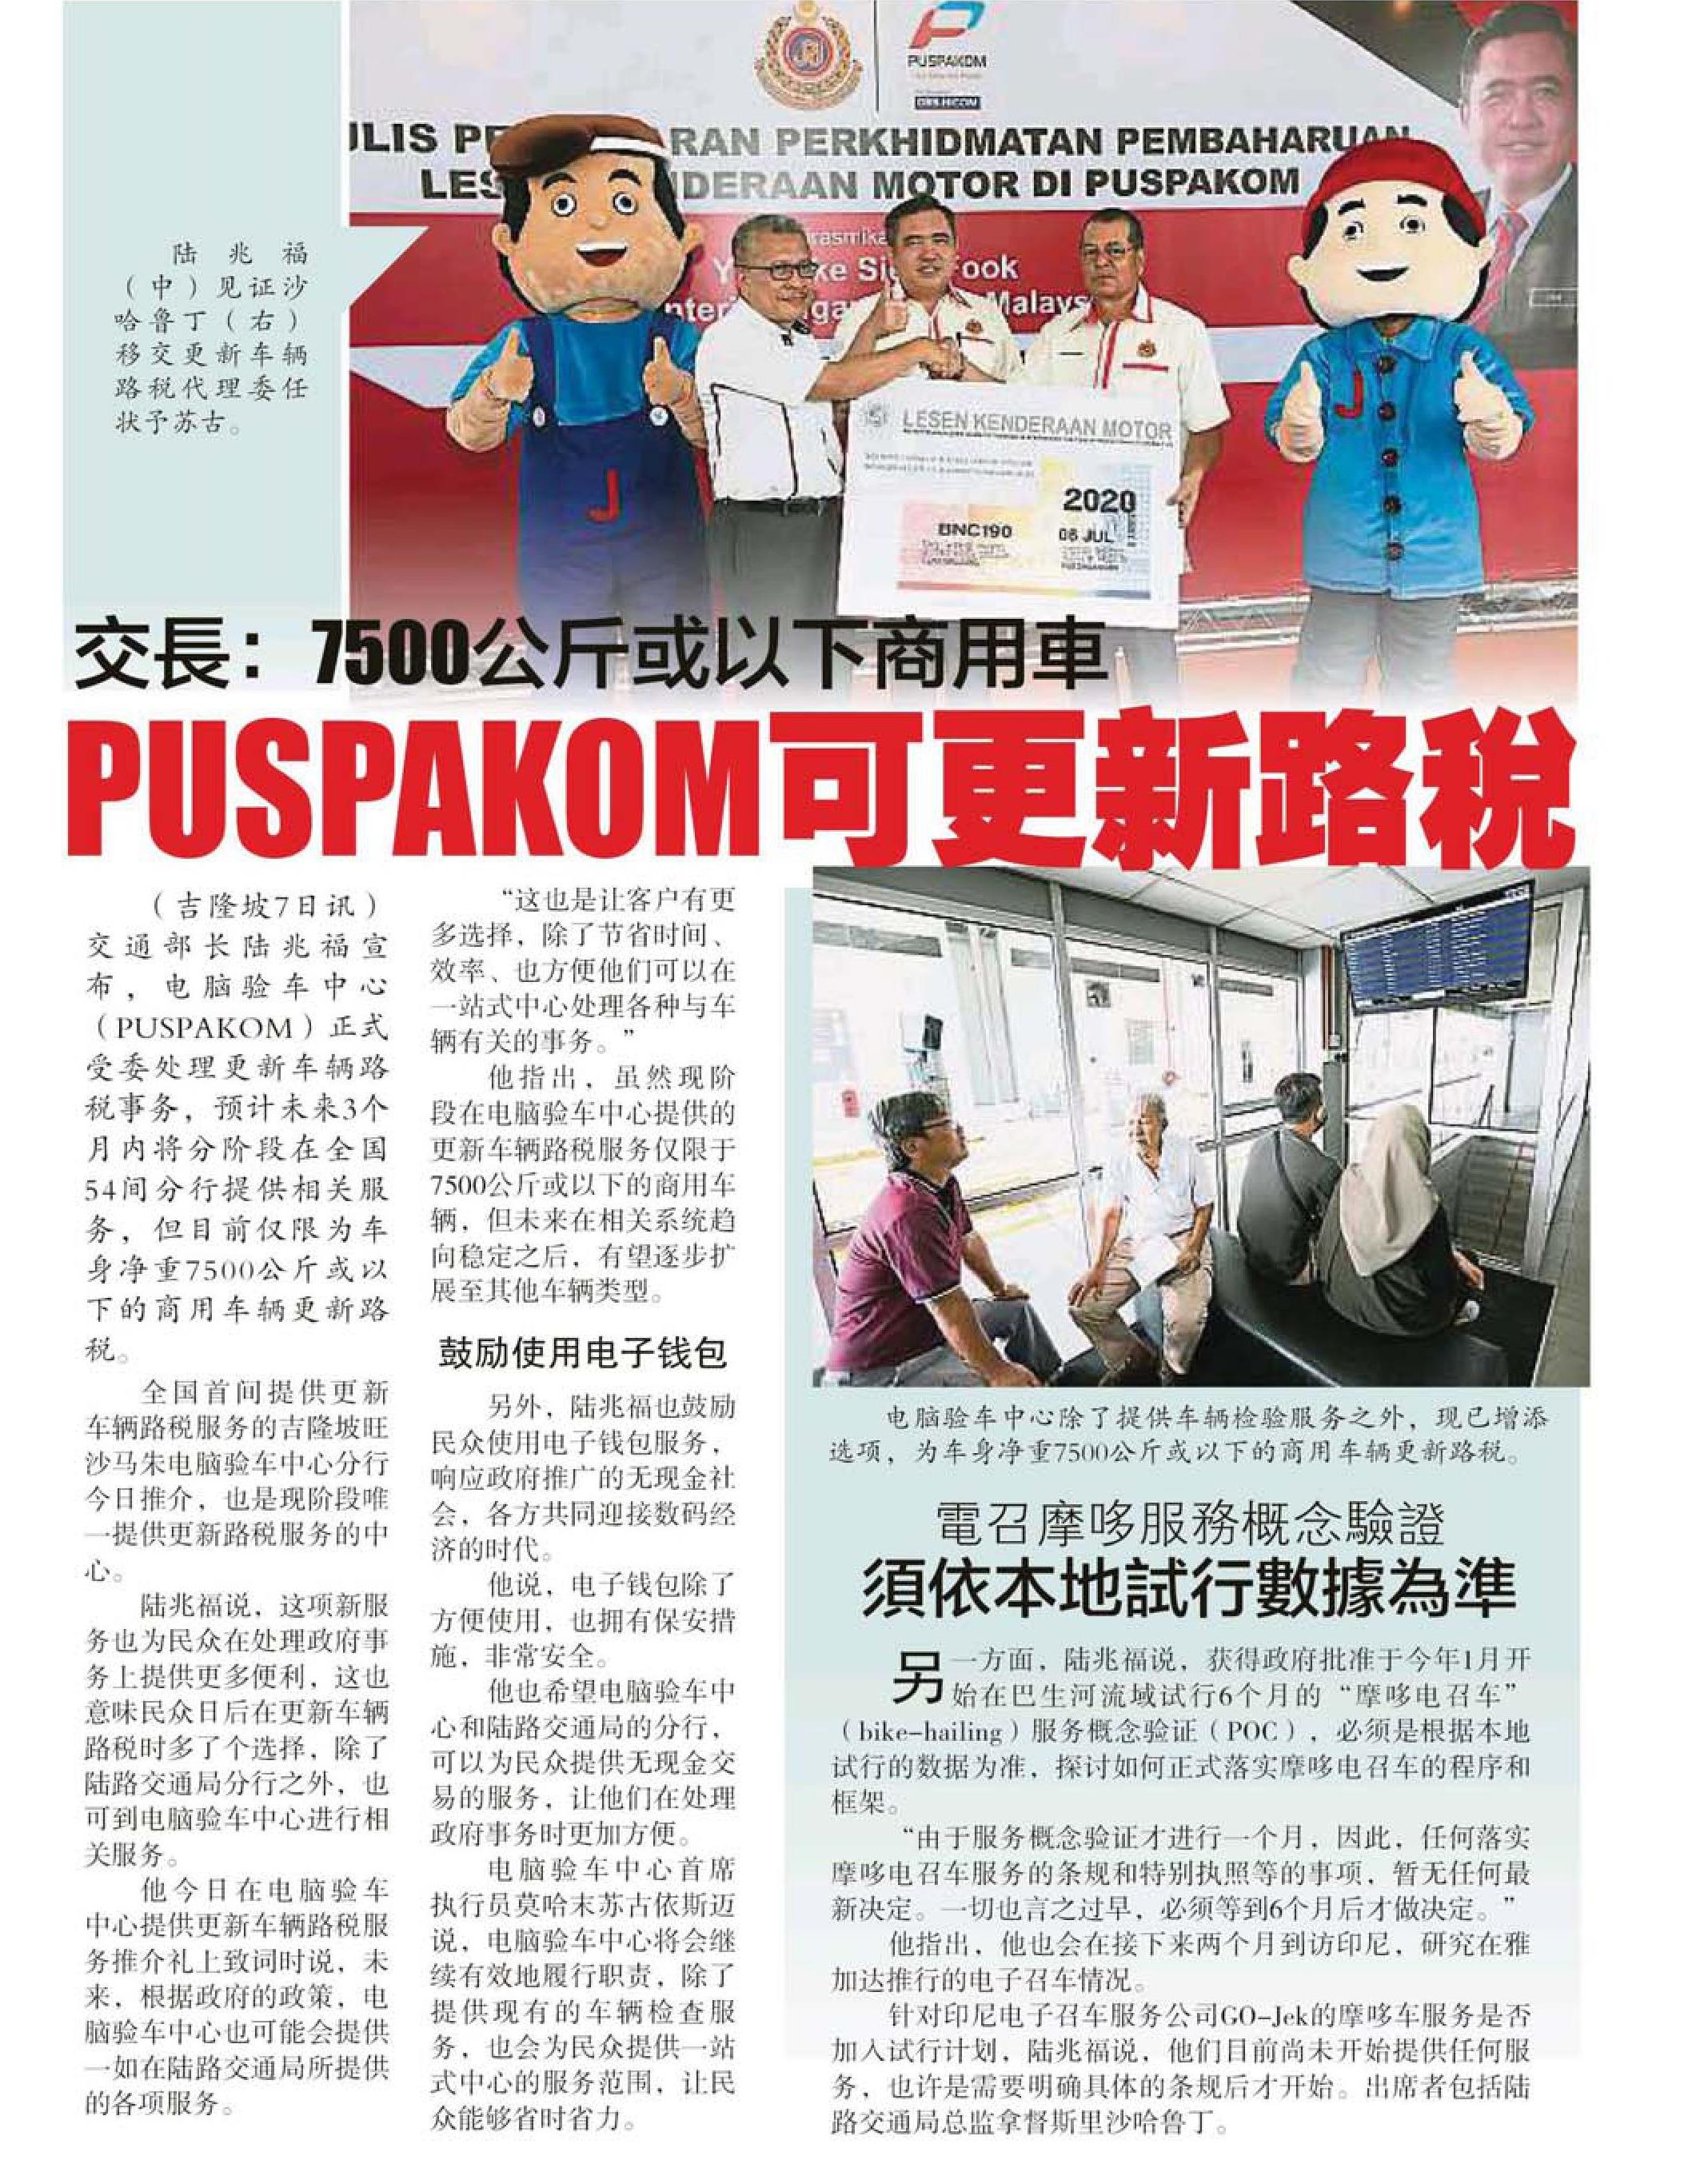 Sin Chew Daily_8.2_Transport minister-Road tax can be renewed at Puspakom rev